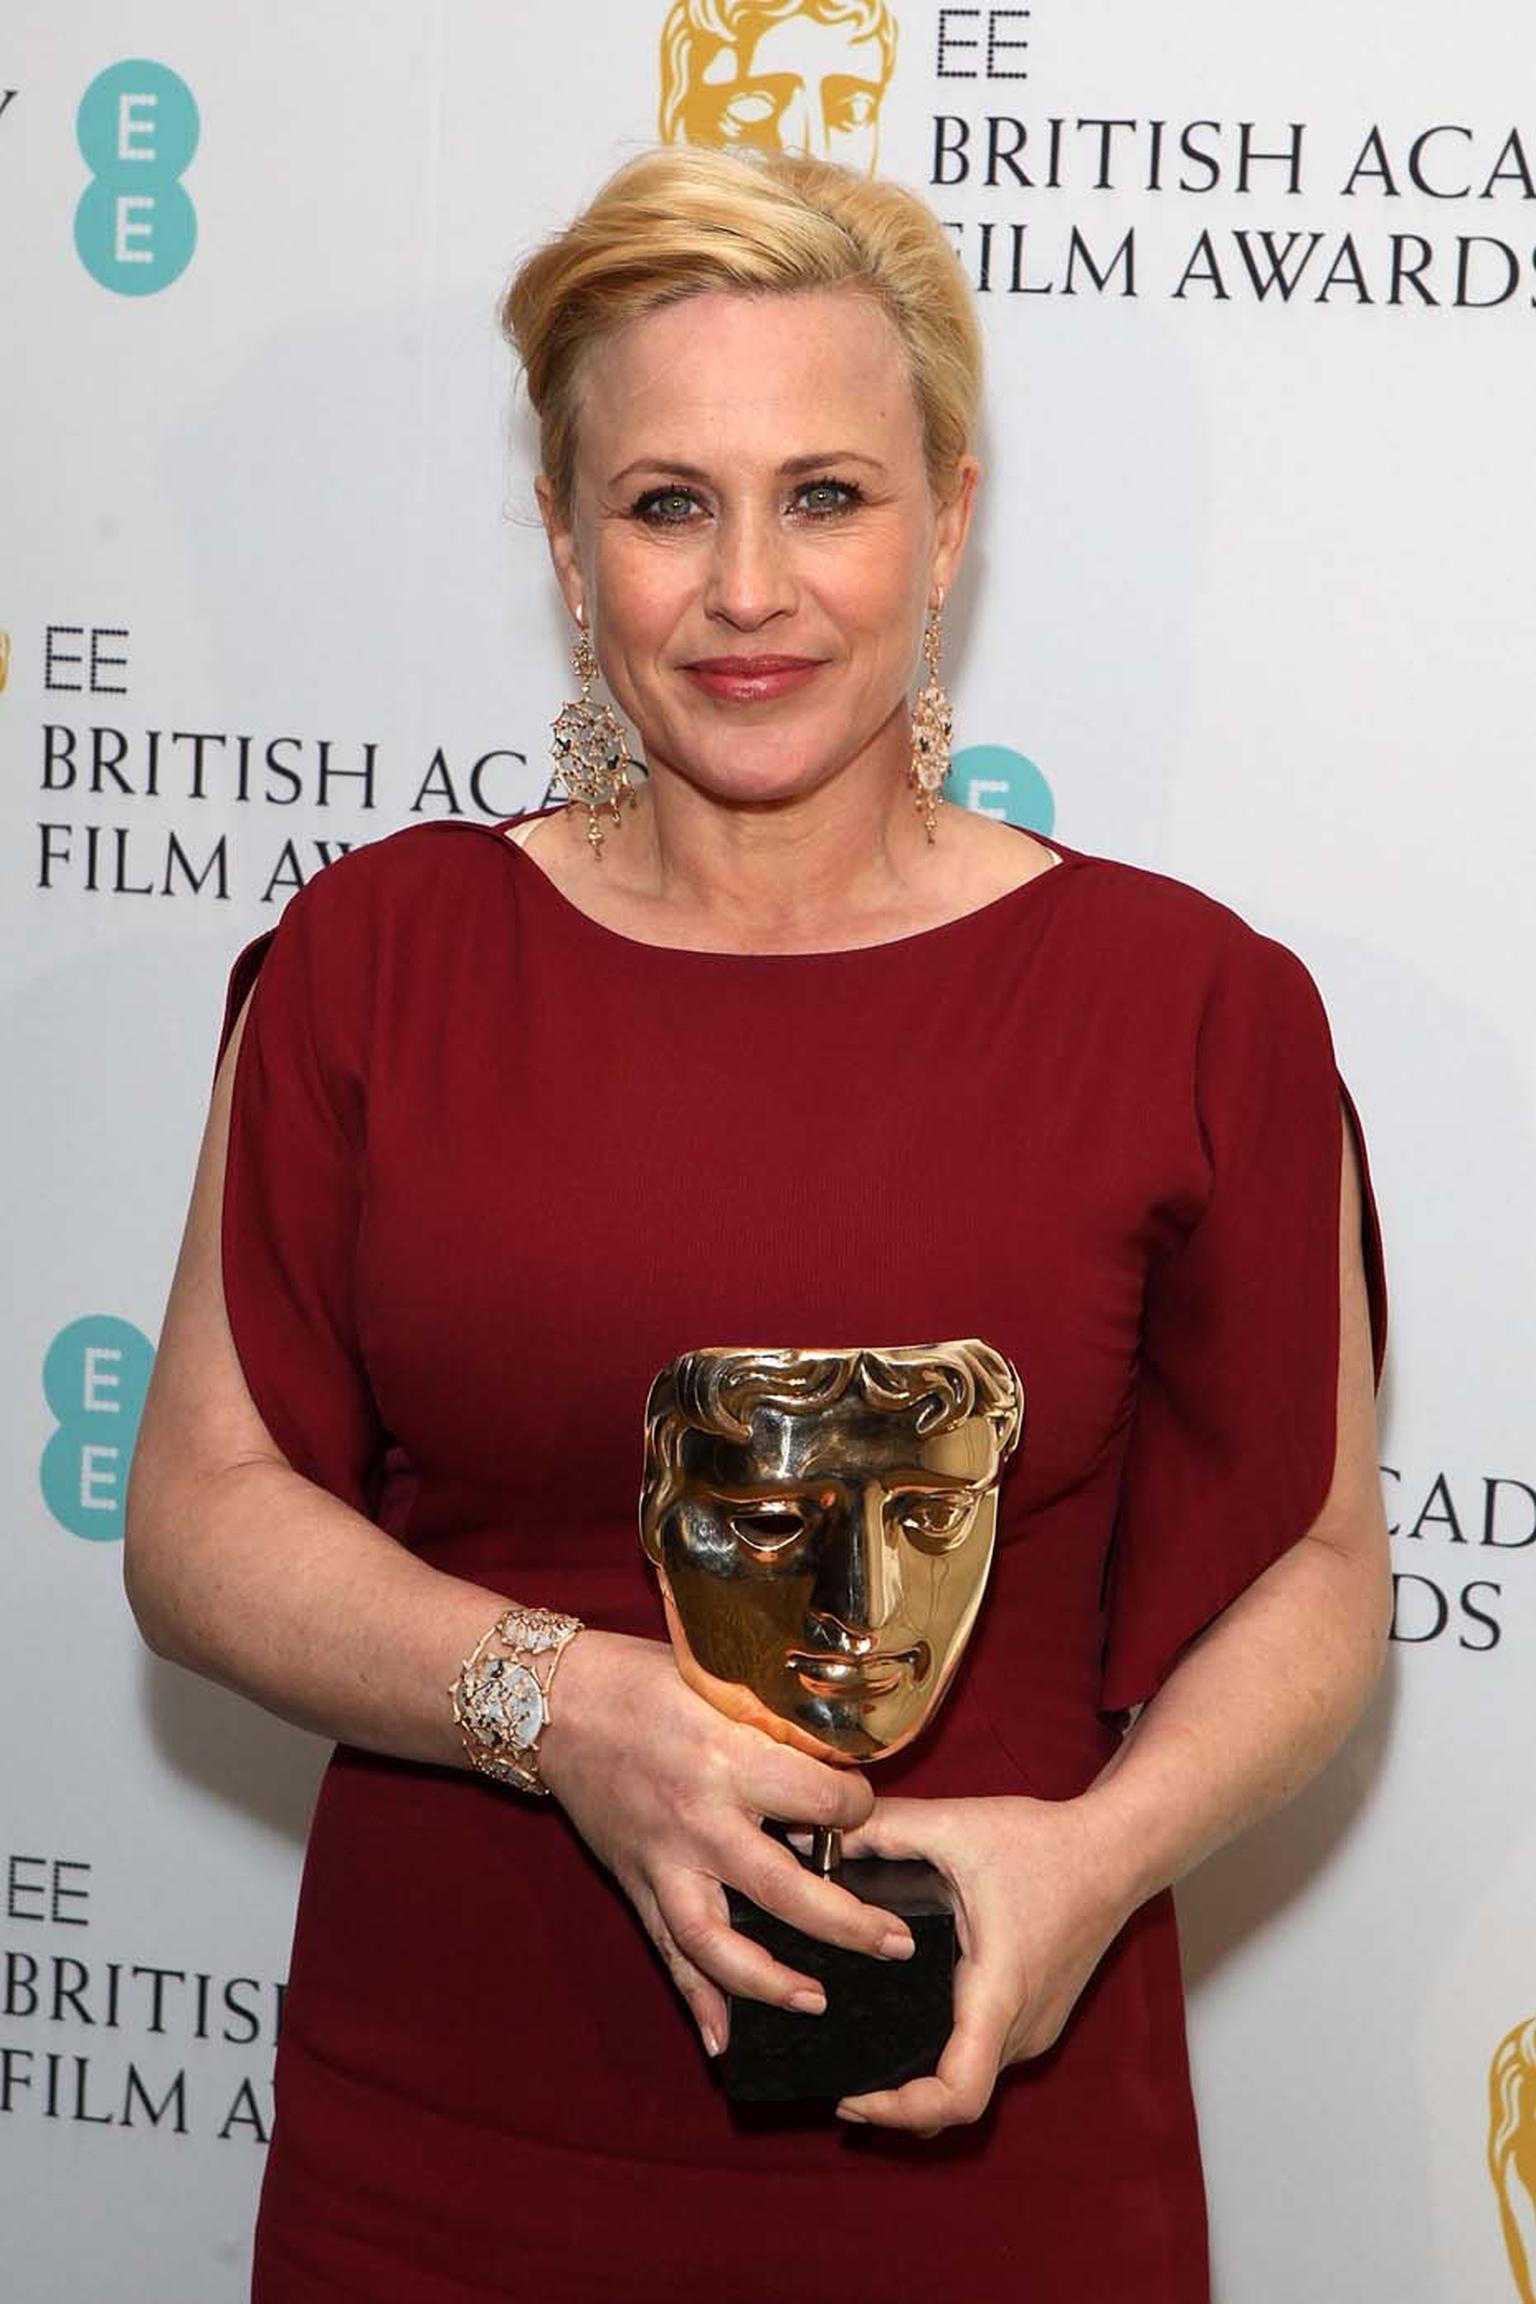 BAFTA Best Supporting Actress winner, Patricia Arquette, received her award at the ceremony at London's Royal Opera House wearing Annoushka Dream Catcher earrings and cuff.